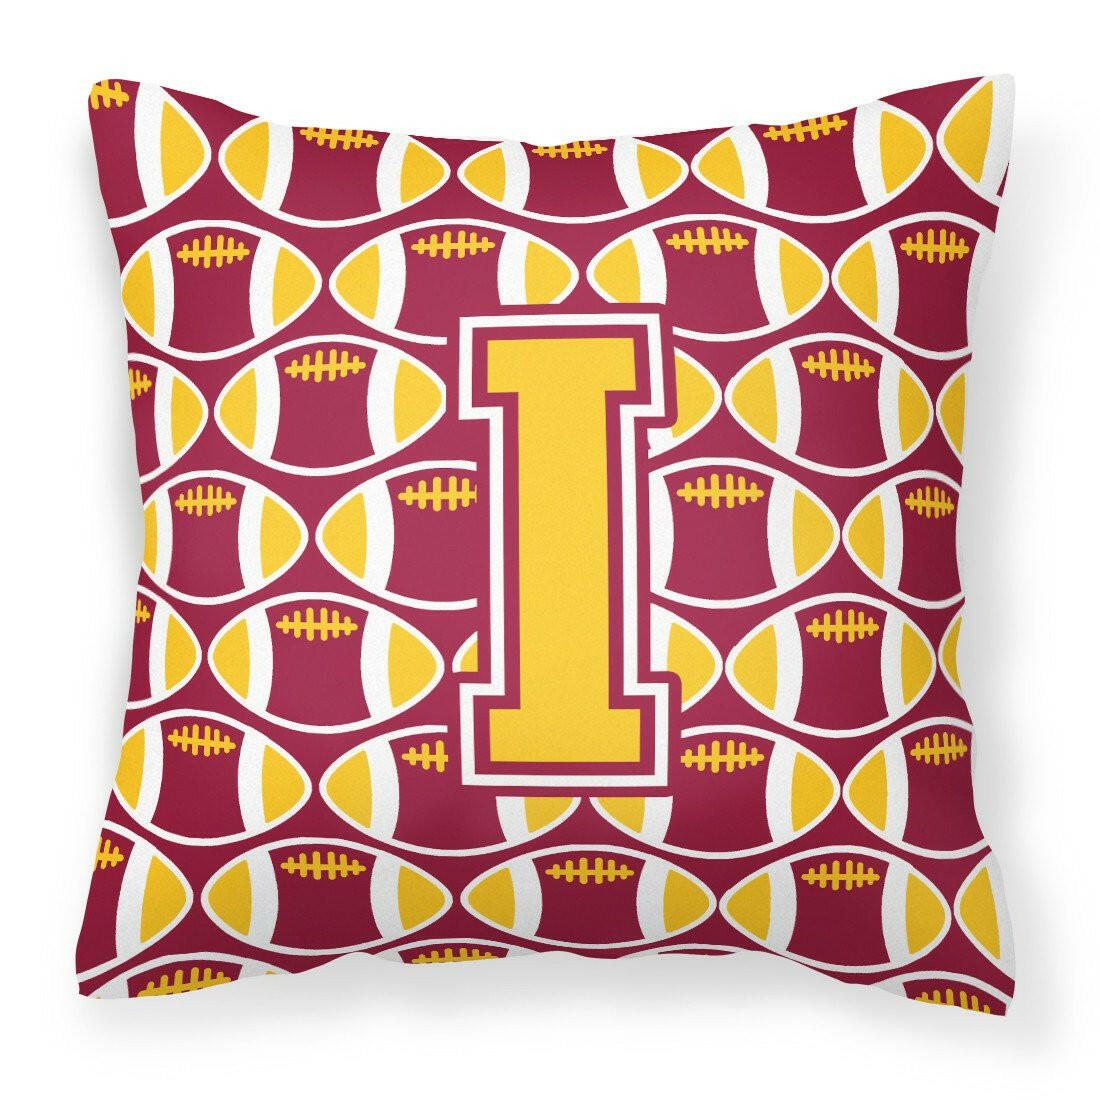 Letter I Football Maroon and Gold Fabric Decorative Pillow CJ1081-IPW1414 by Caroline's Treasures